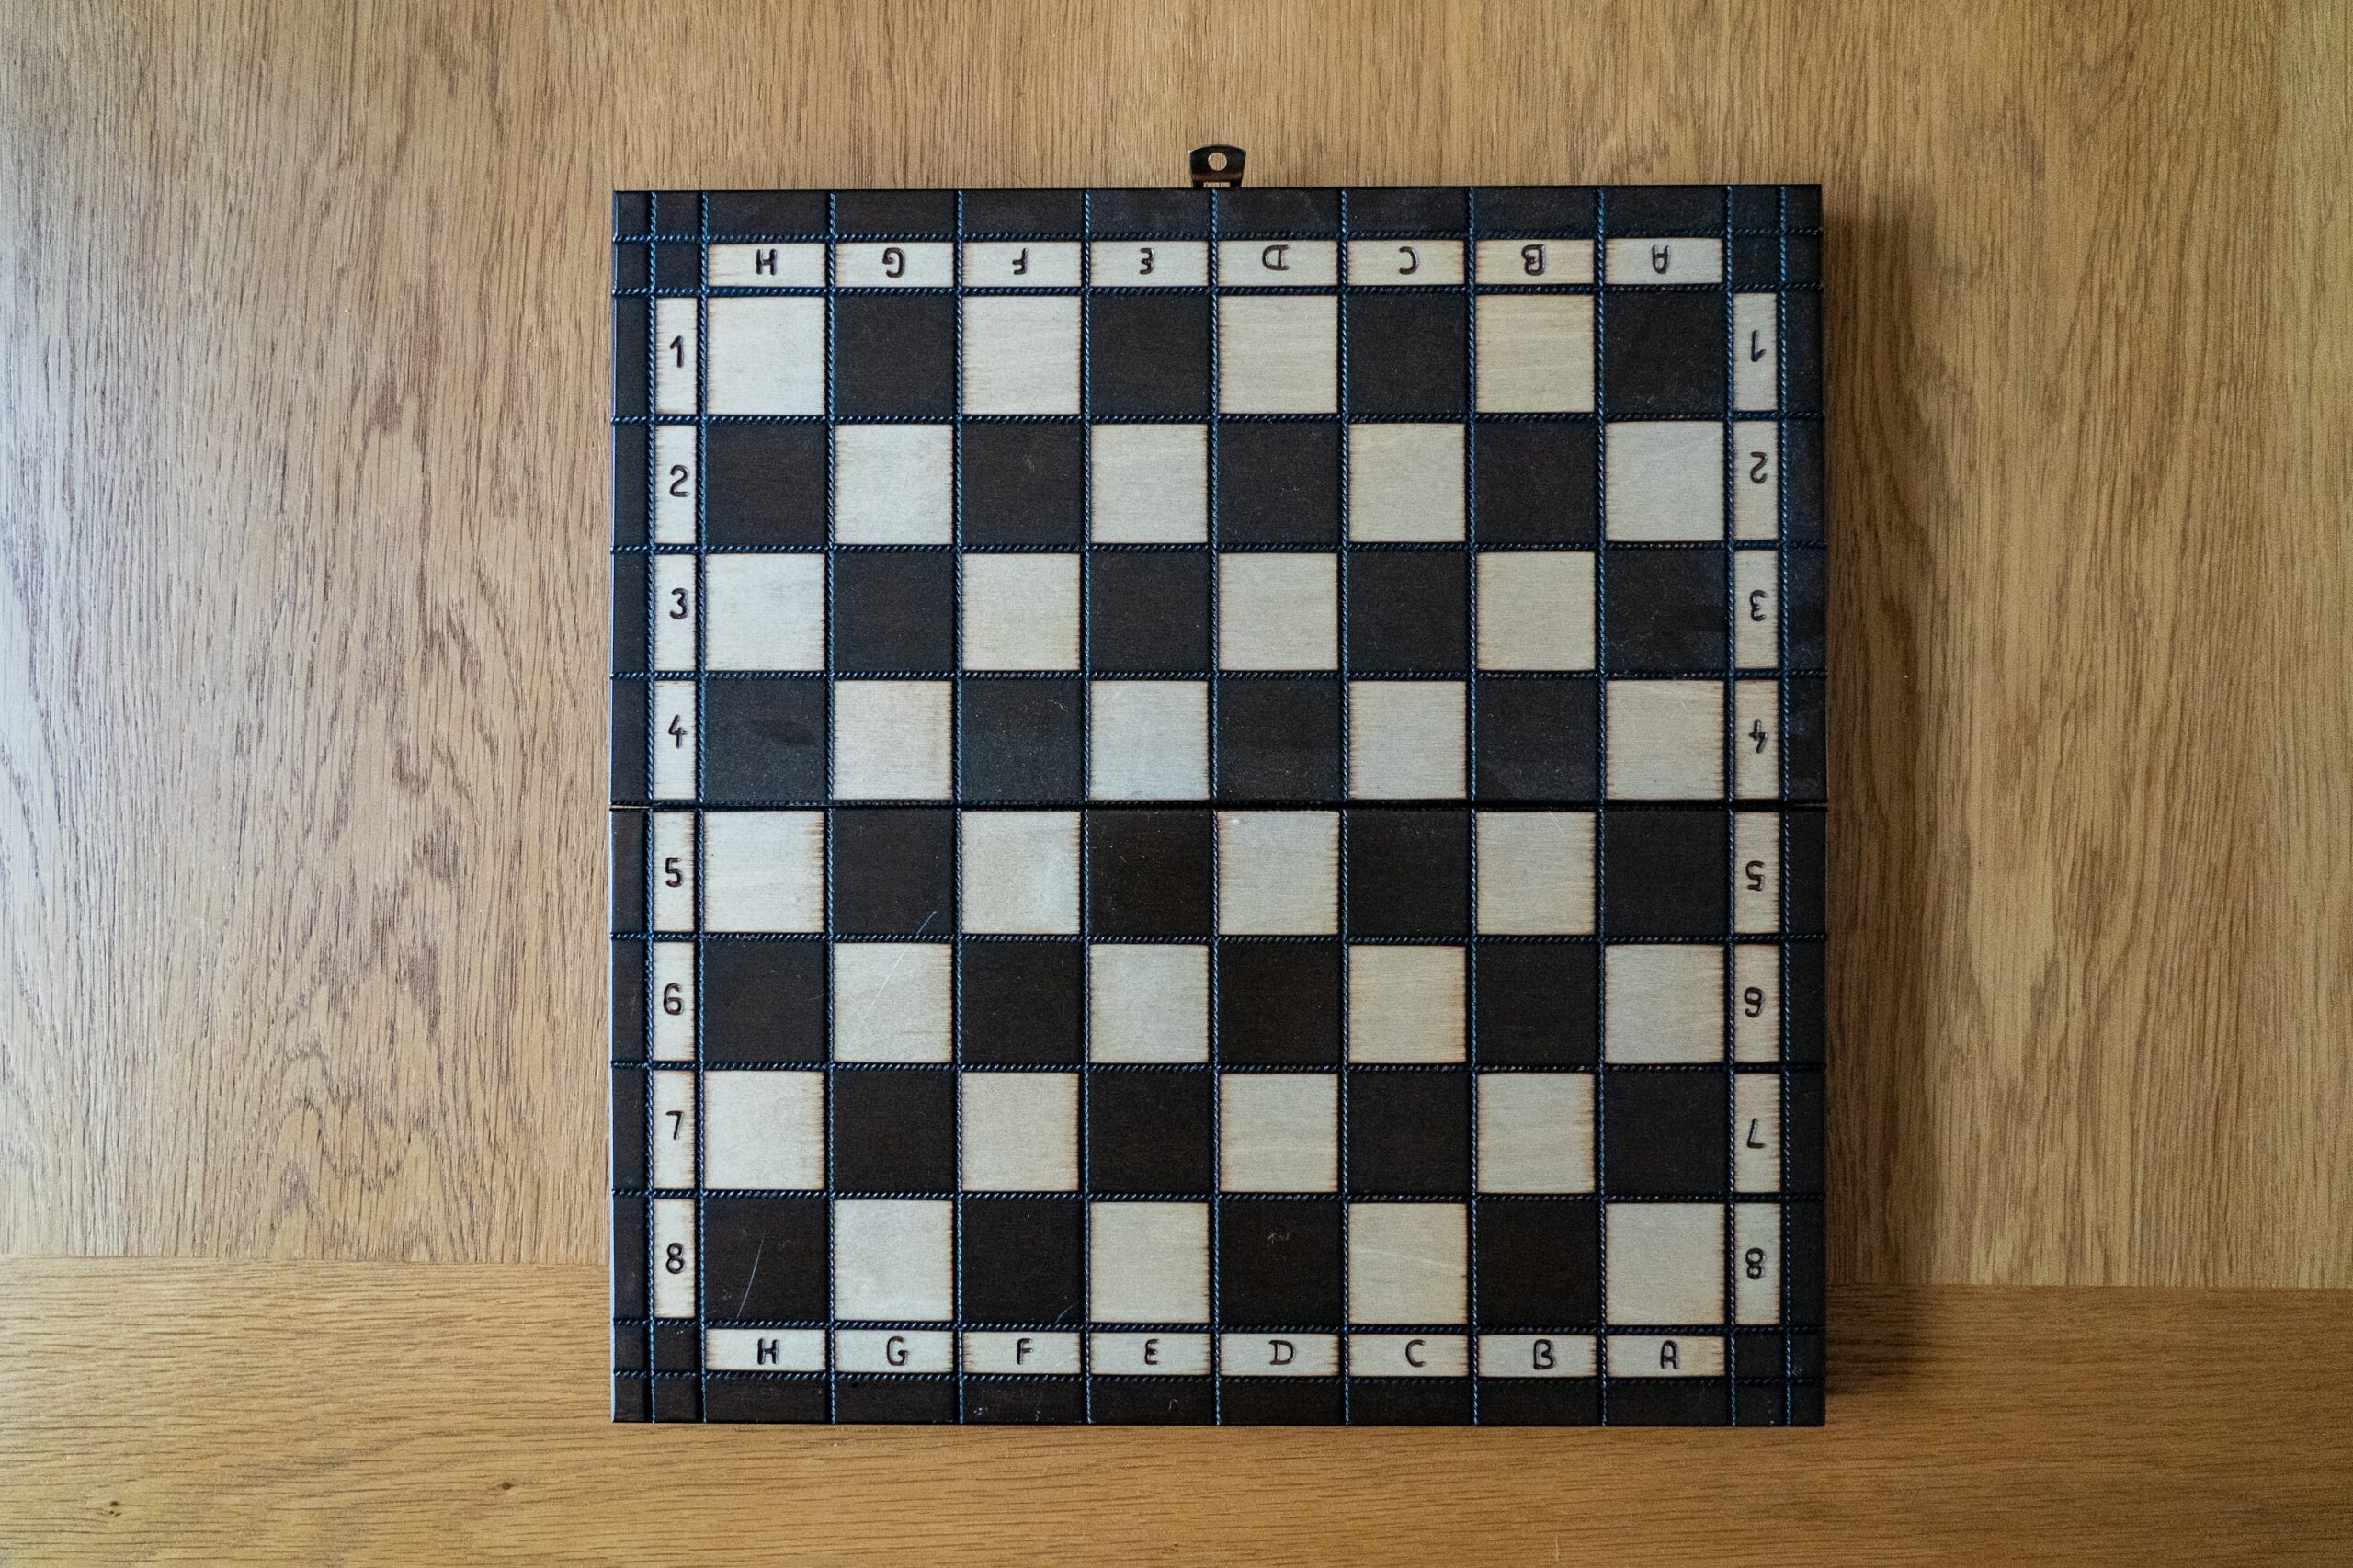  chessboard is a 64-square grid 